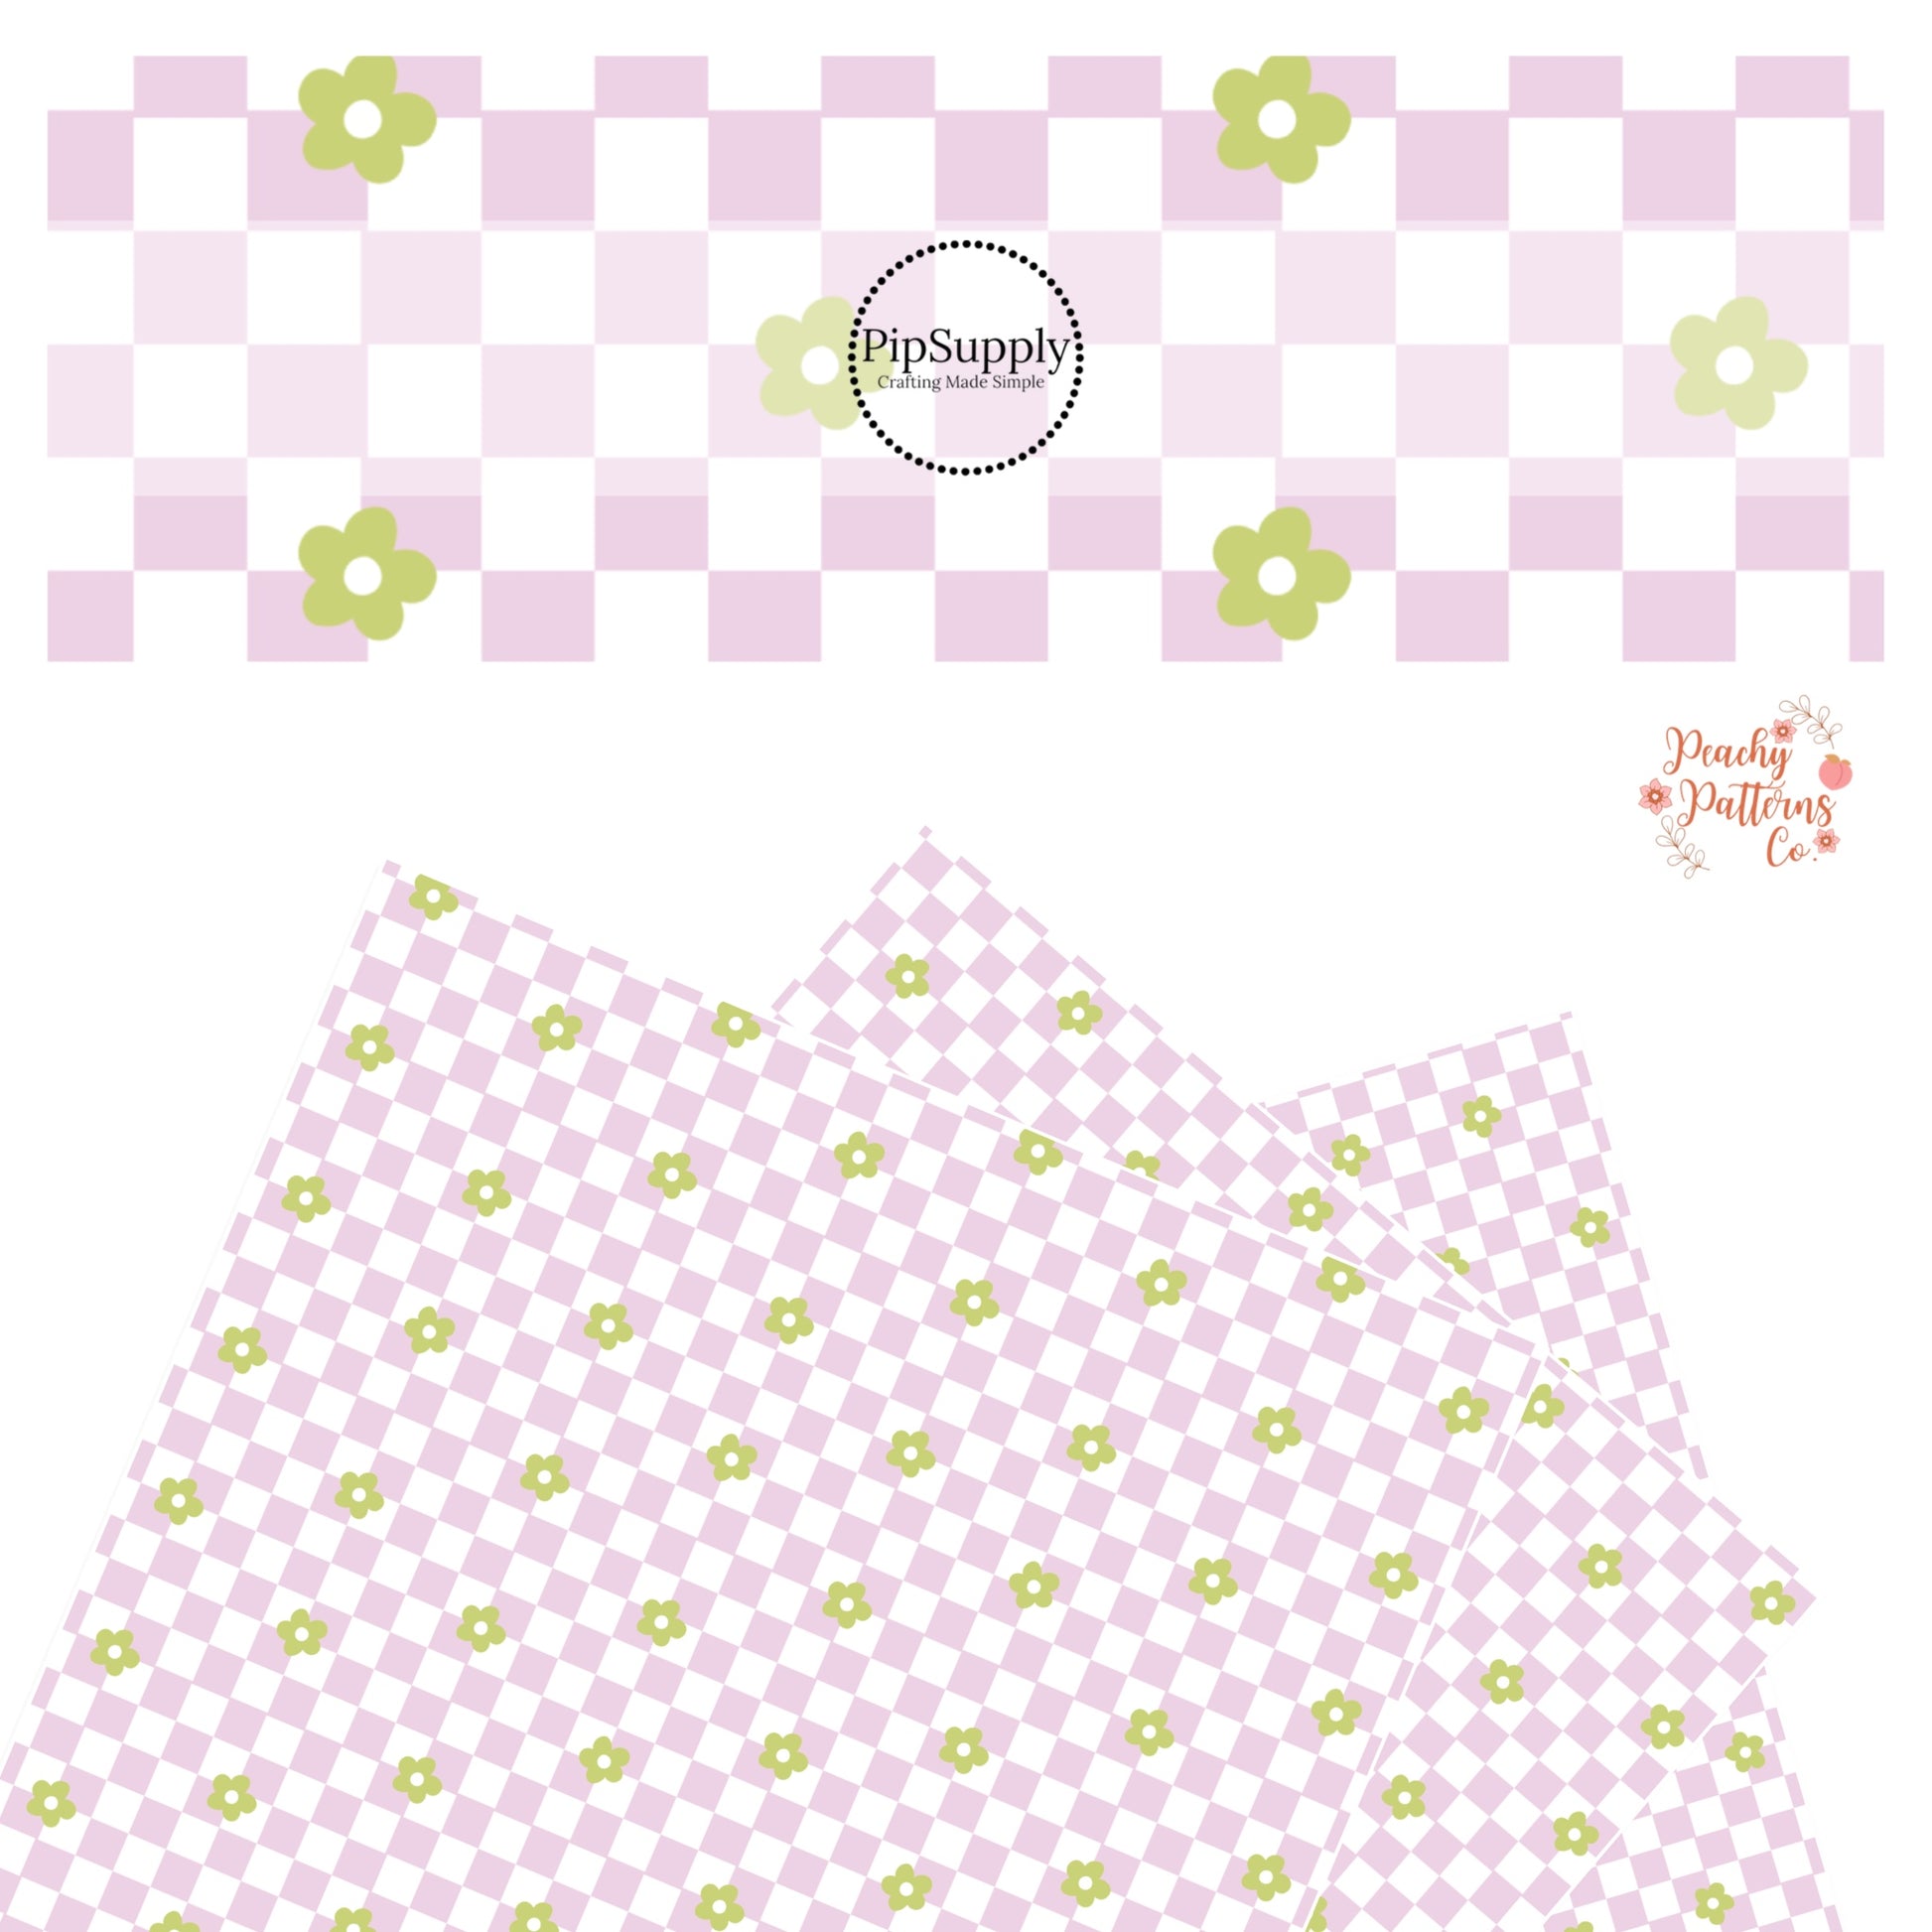 Green flowers with white center on purple and white checkered faux leather sheets